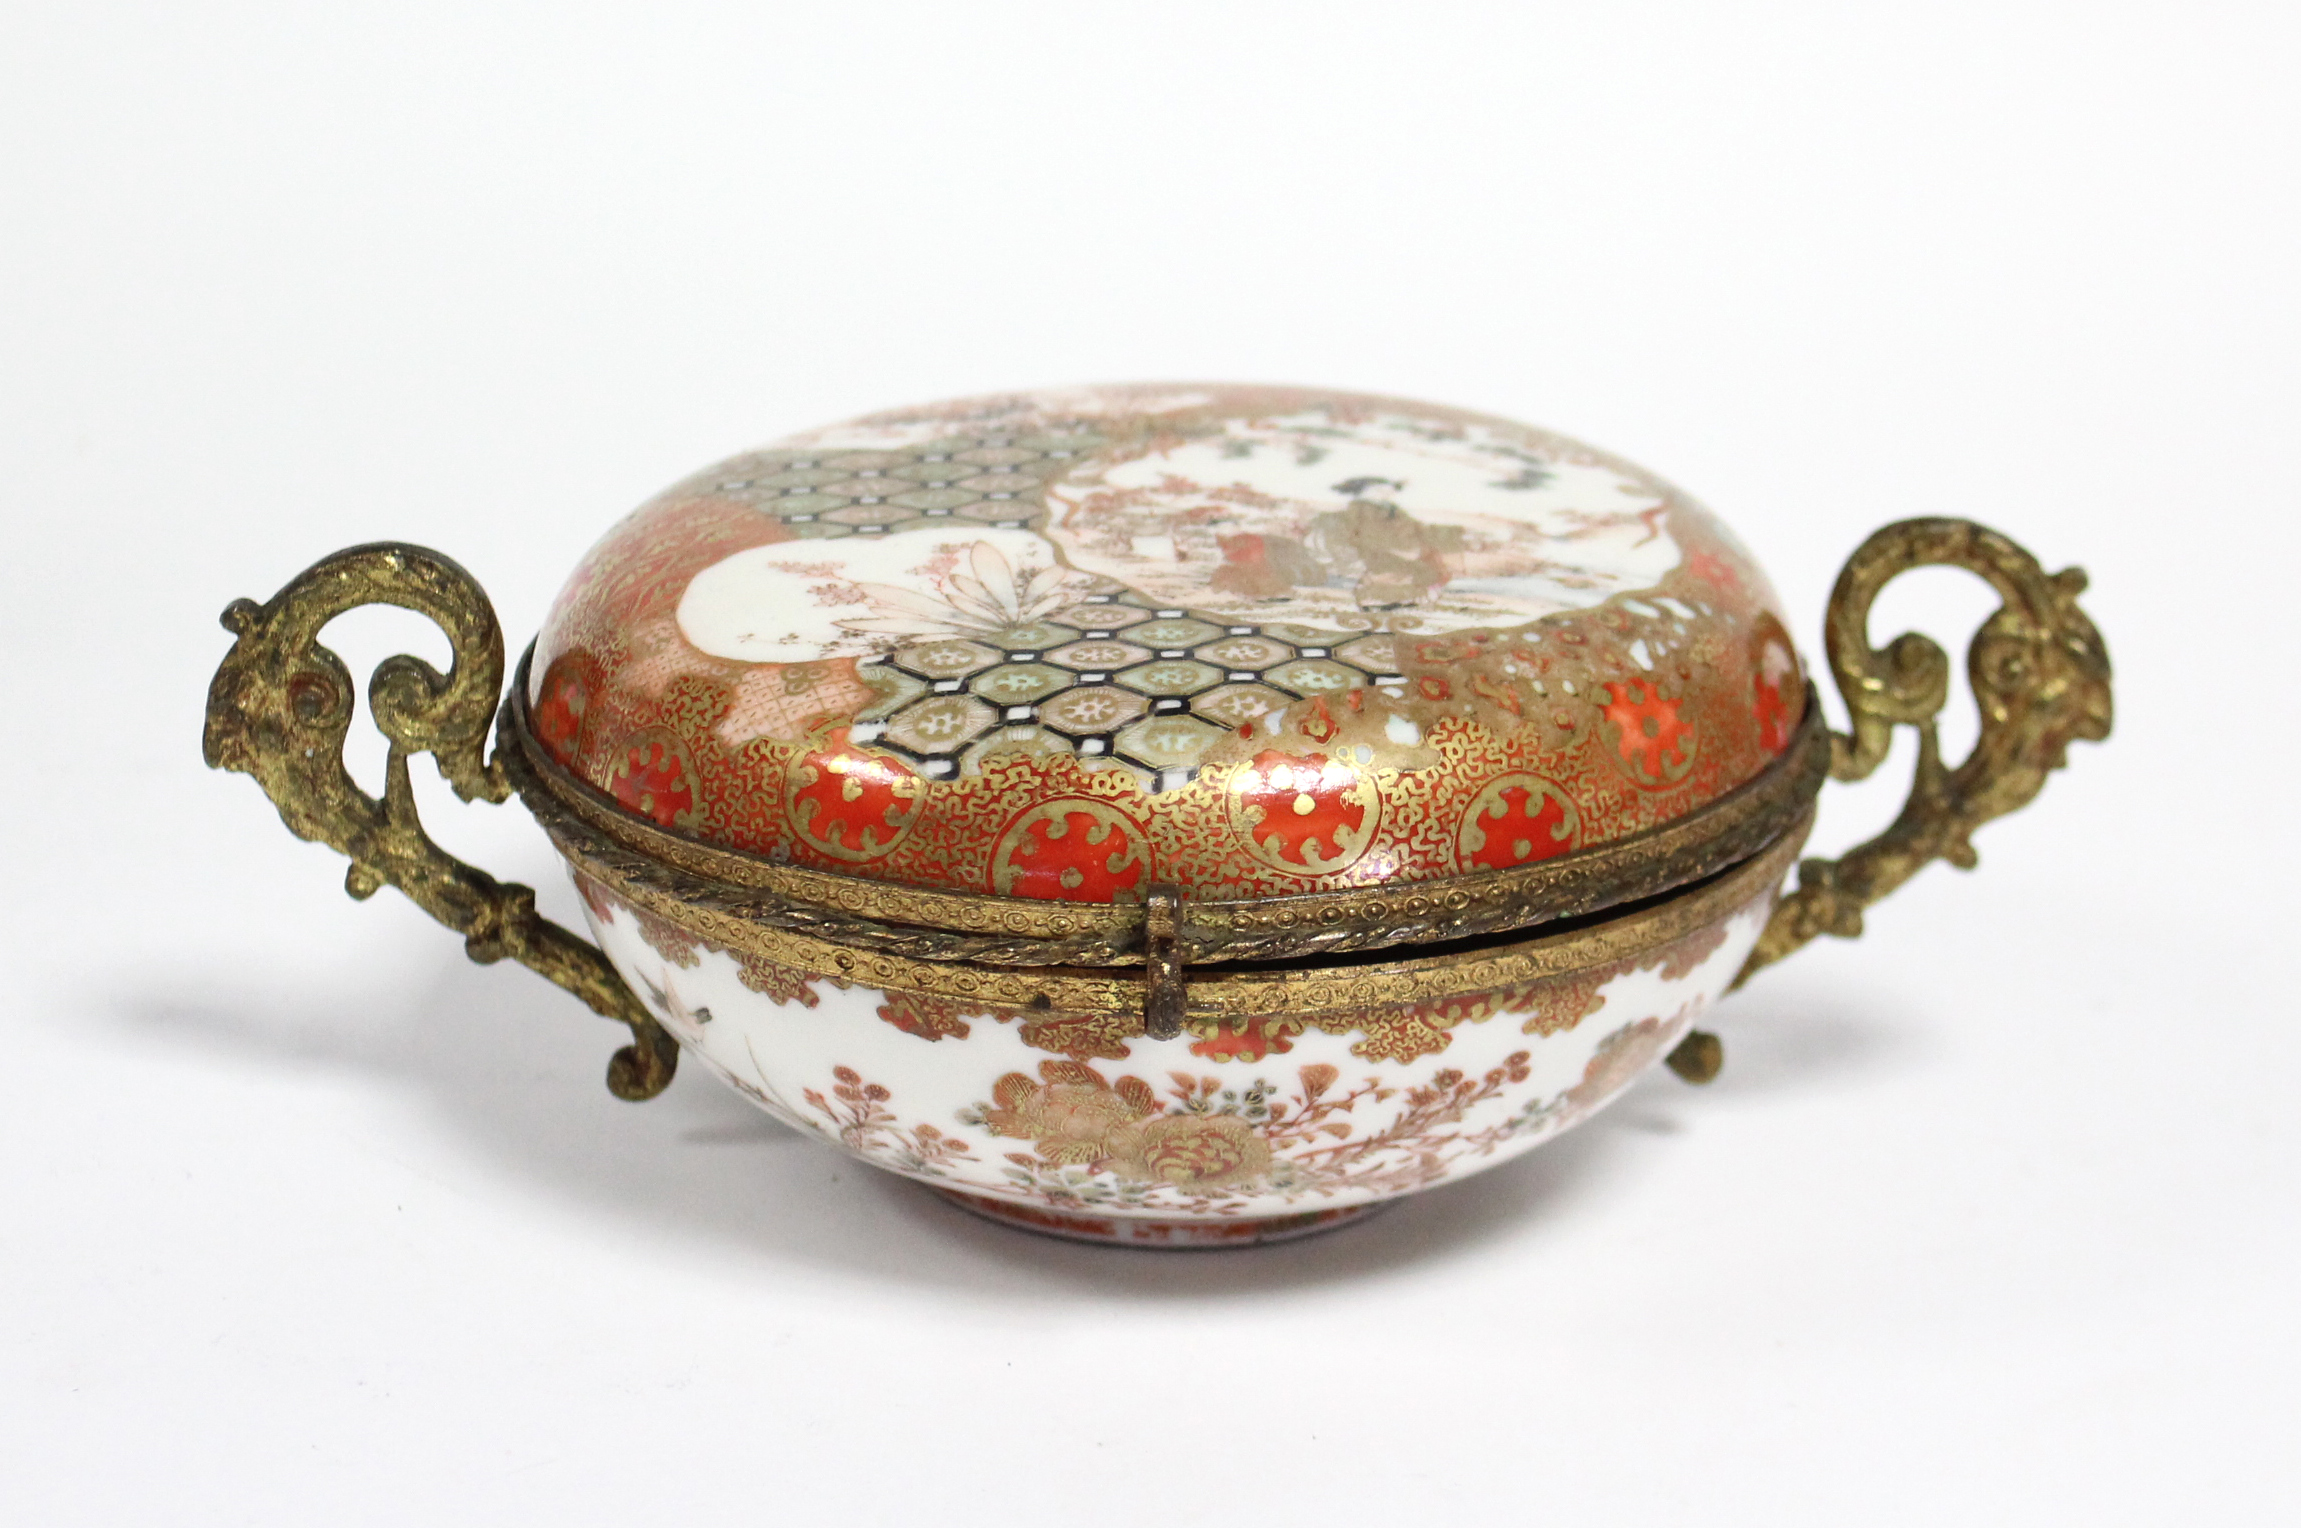 A 19th century Japanese Kutani porcelain circular box & cover decorated with figure scenes, flowers, - Image 3 of 7